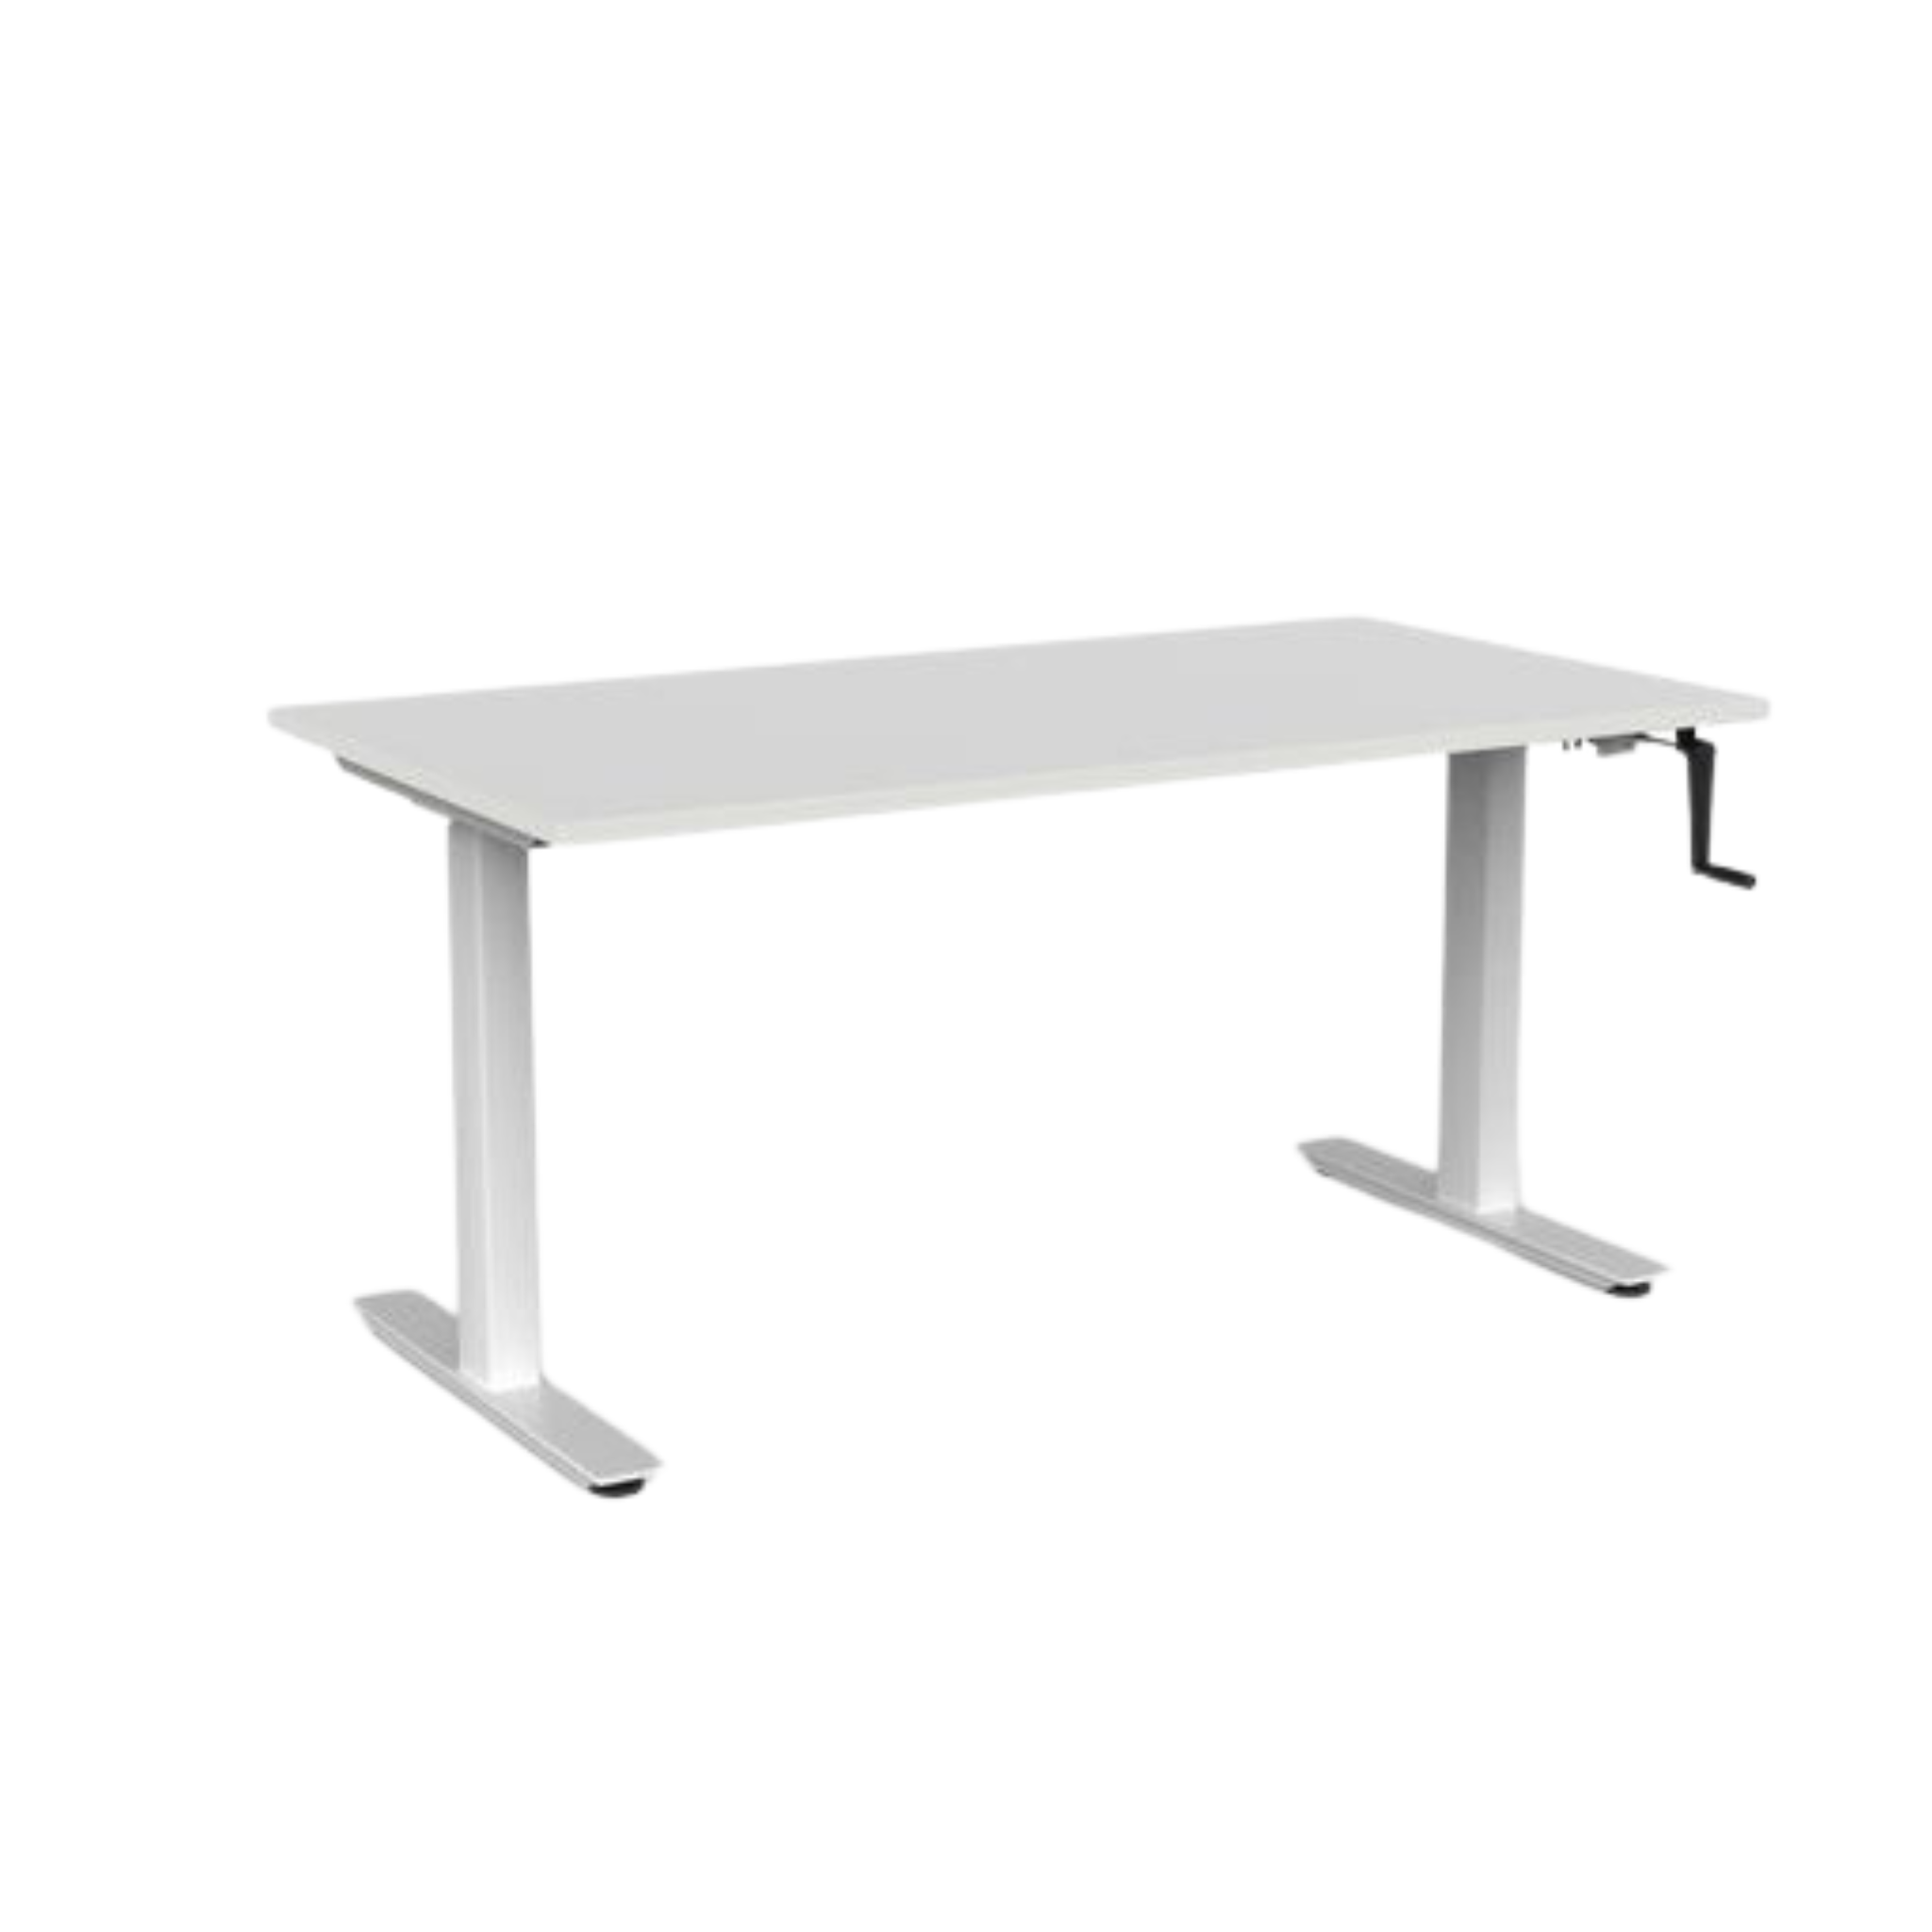 Agile winder sit to stand desk with white frame and white top